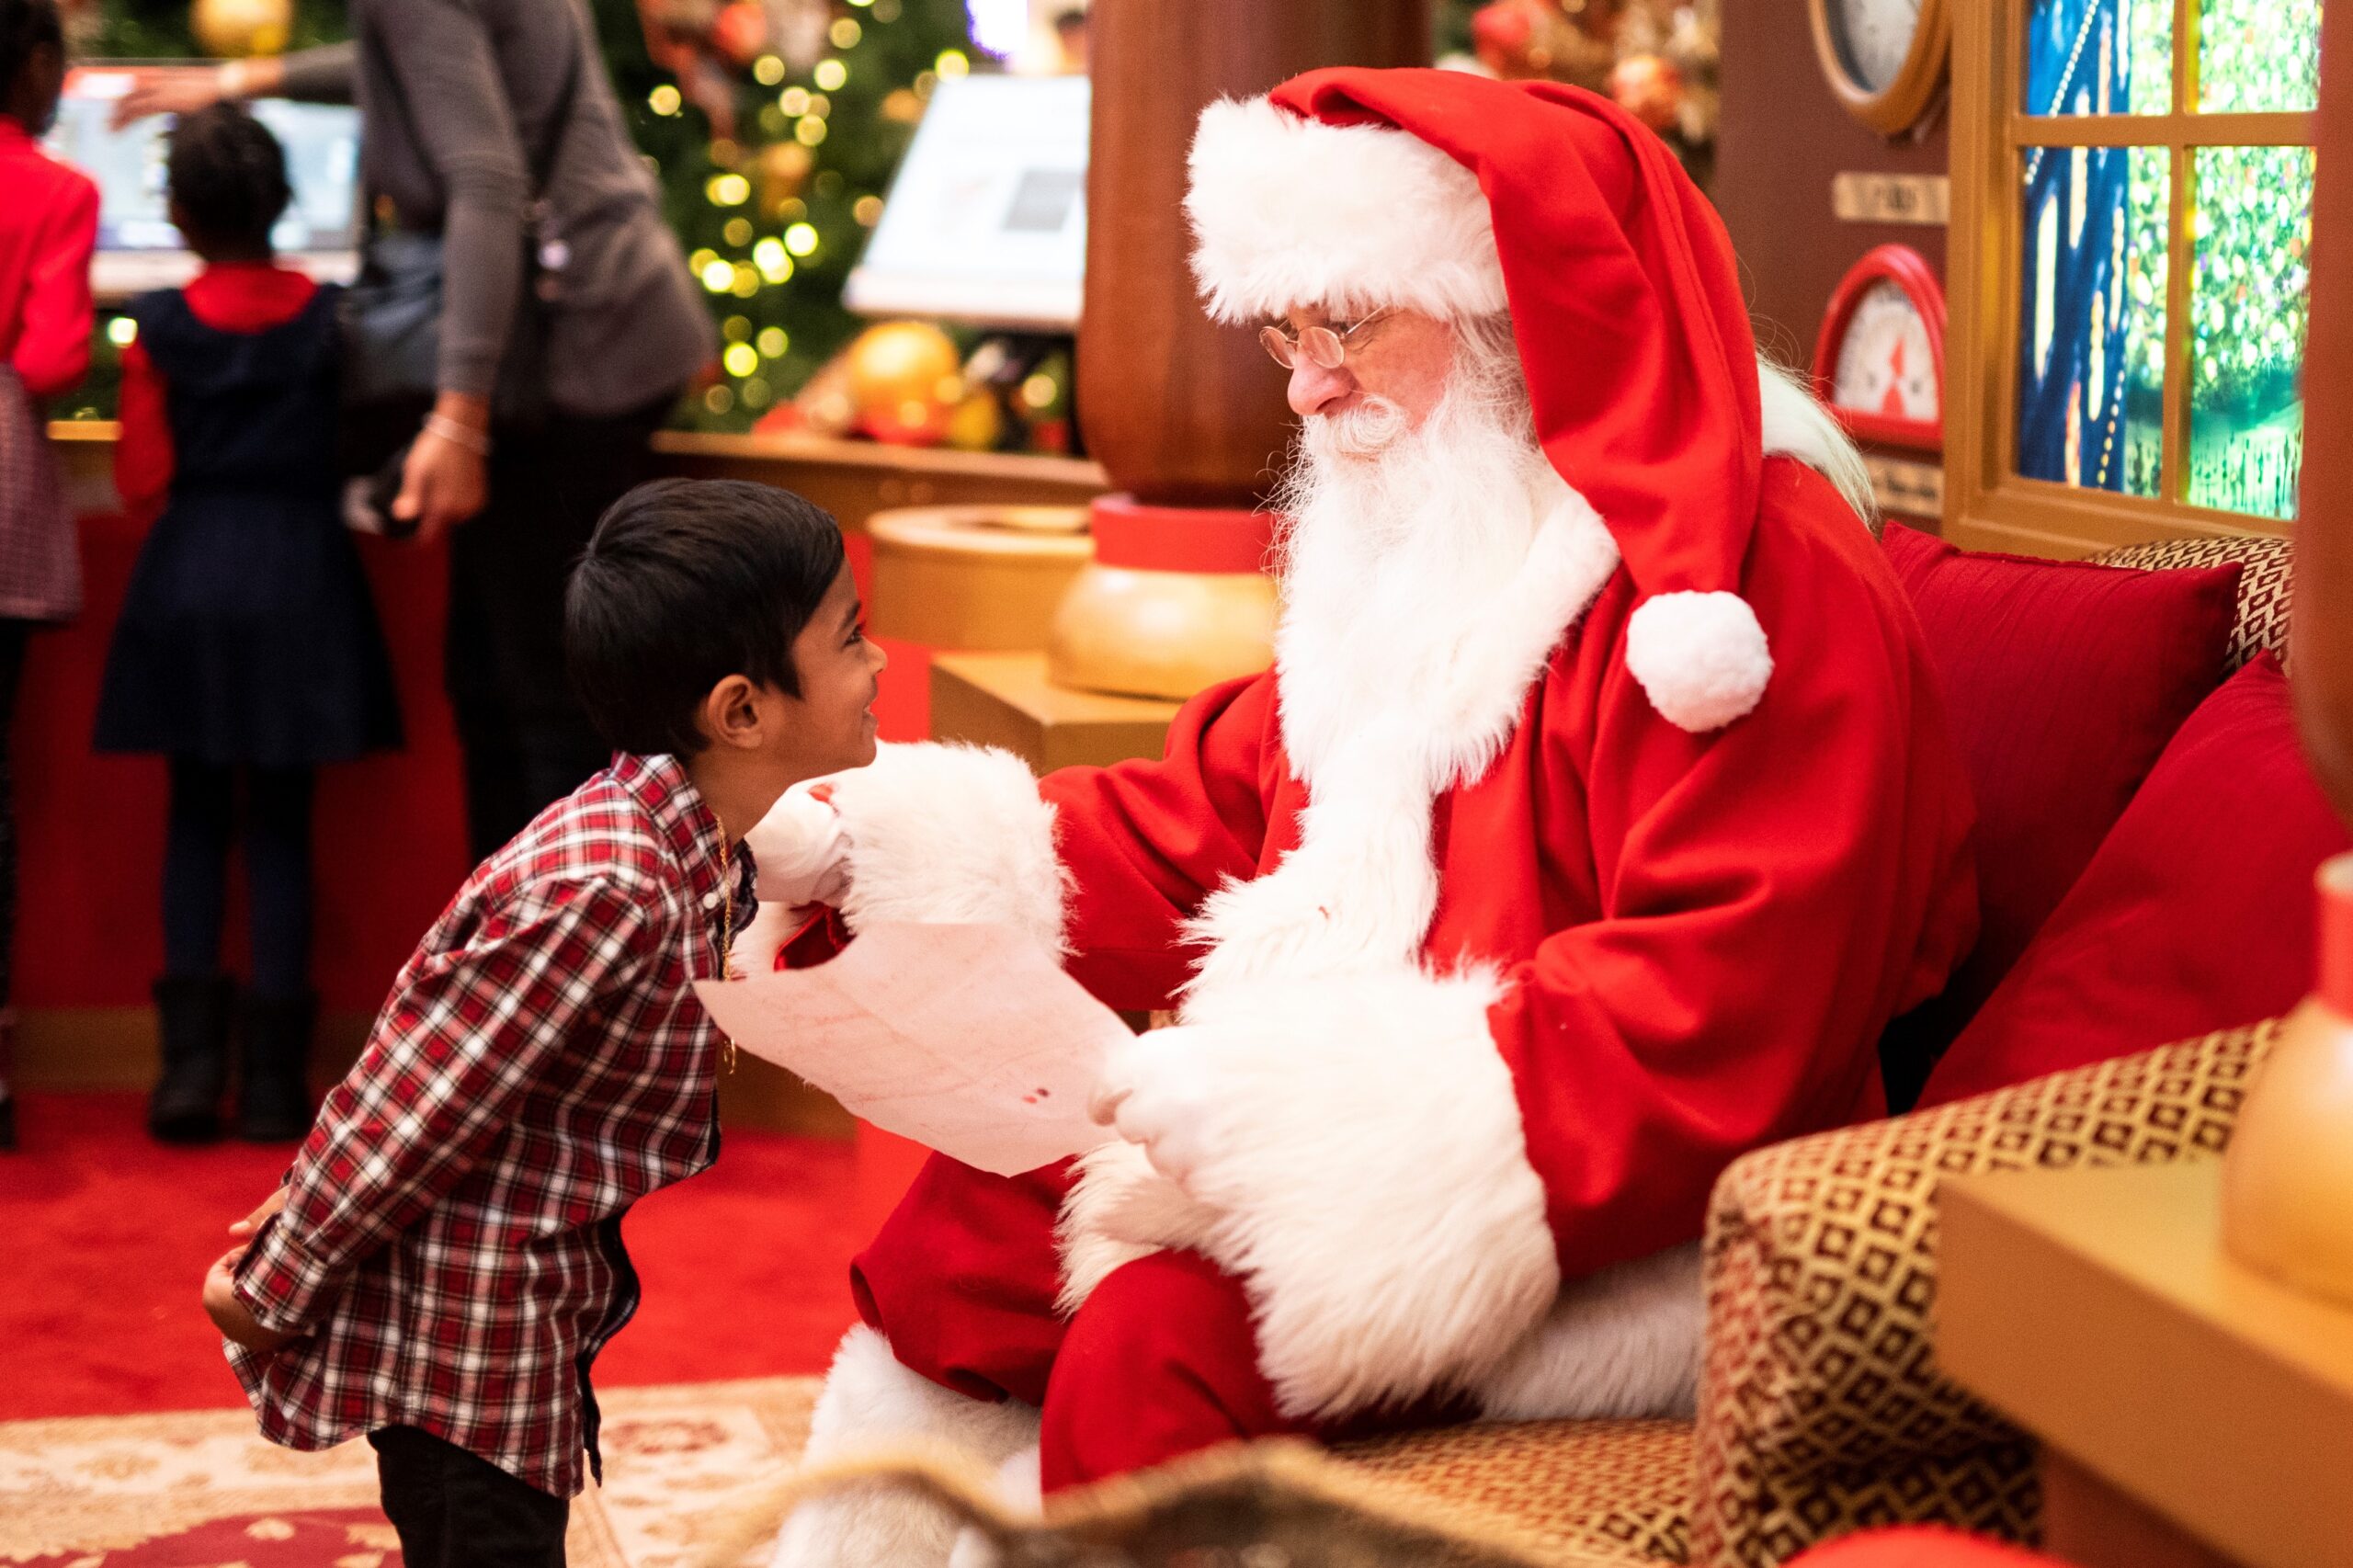 Santa interacting with young child